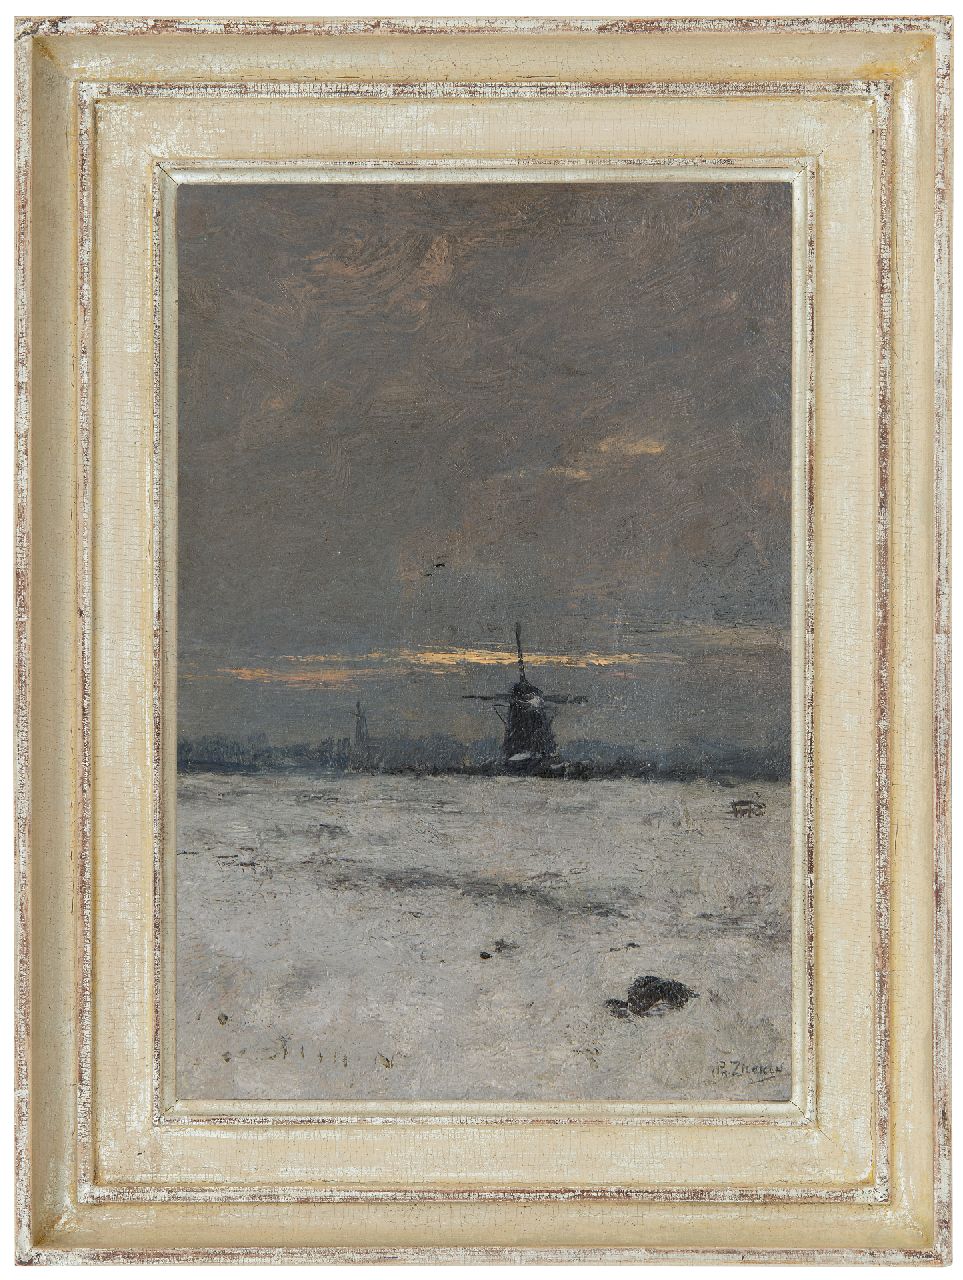 Zilcken C.L.P.  | Charles Louis Philippe 'Philip' Zilcken, A windmill in a snowy landscape at sunset, oil on panel 29.7 x 20.3 cm, signed l.r. and painted ca. 1903